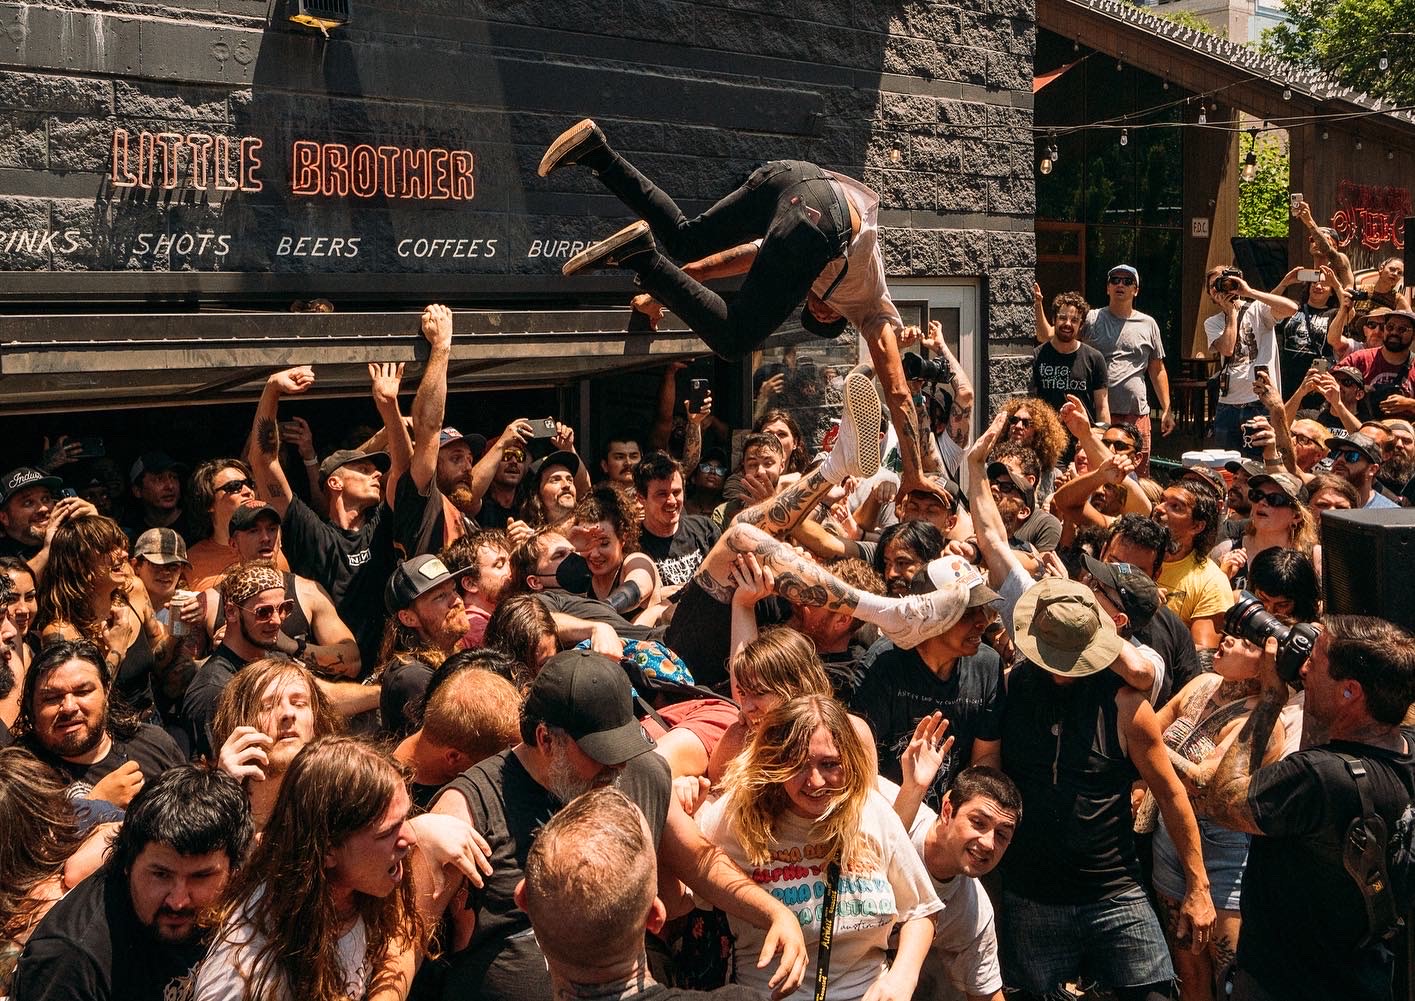 A crowd of people at a concert outside with someone crowdsurfing.